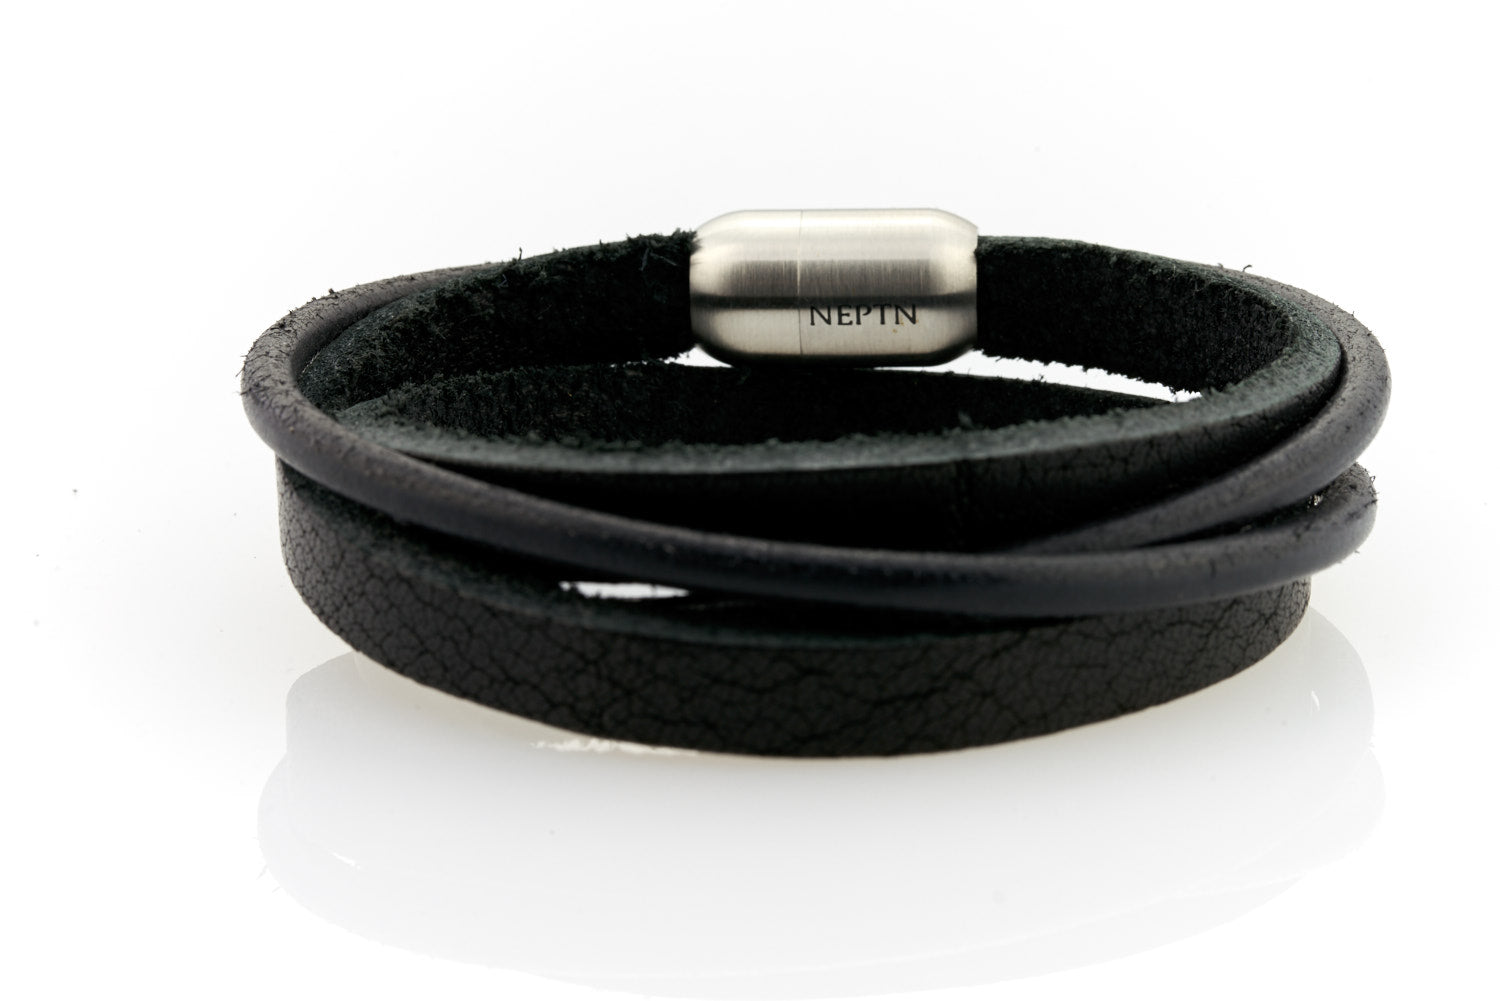  NEPTN Leather Bracelet Sailor Pro Steel 8 - Black Leather  Braided, Size Large (Wrist Circumference 7-7.5): Clothing, Shoes & Jewelry